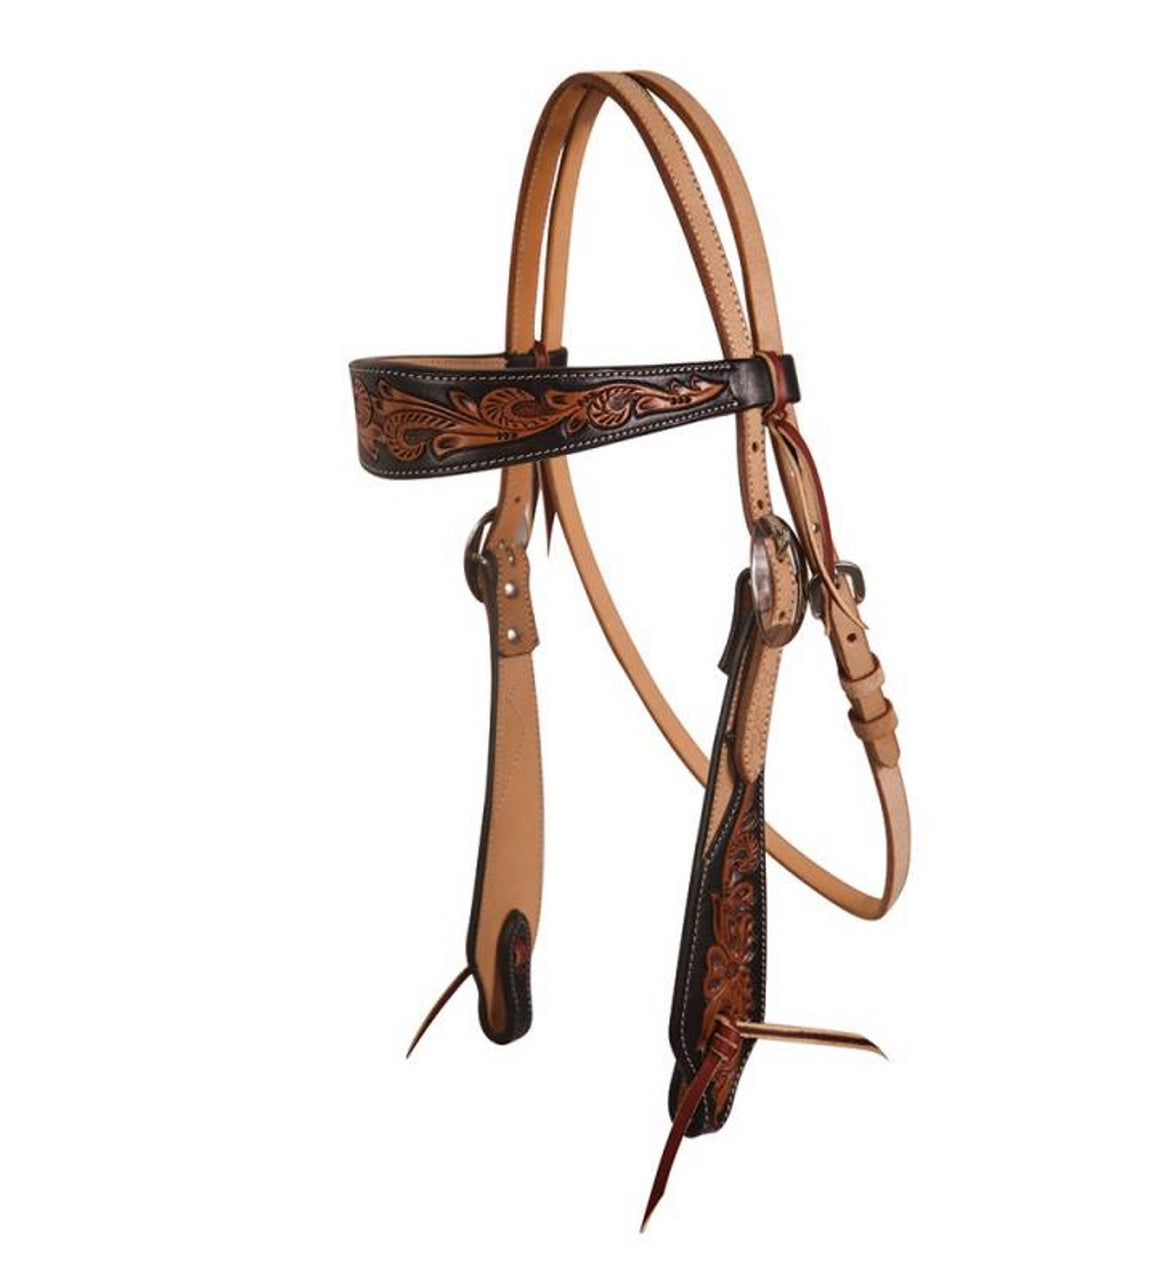 Professional's Choice Black Floral Roughout Browband Headstall